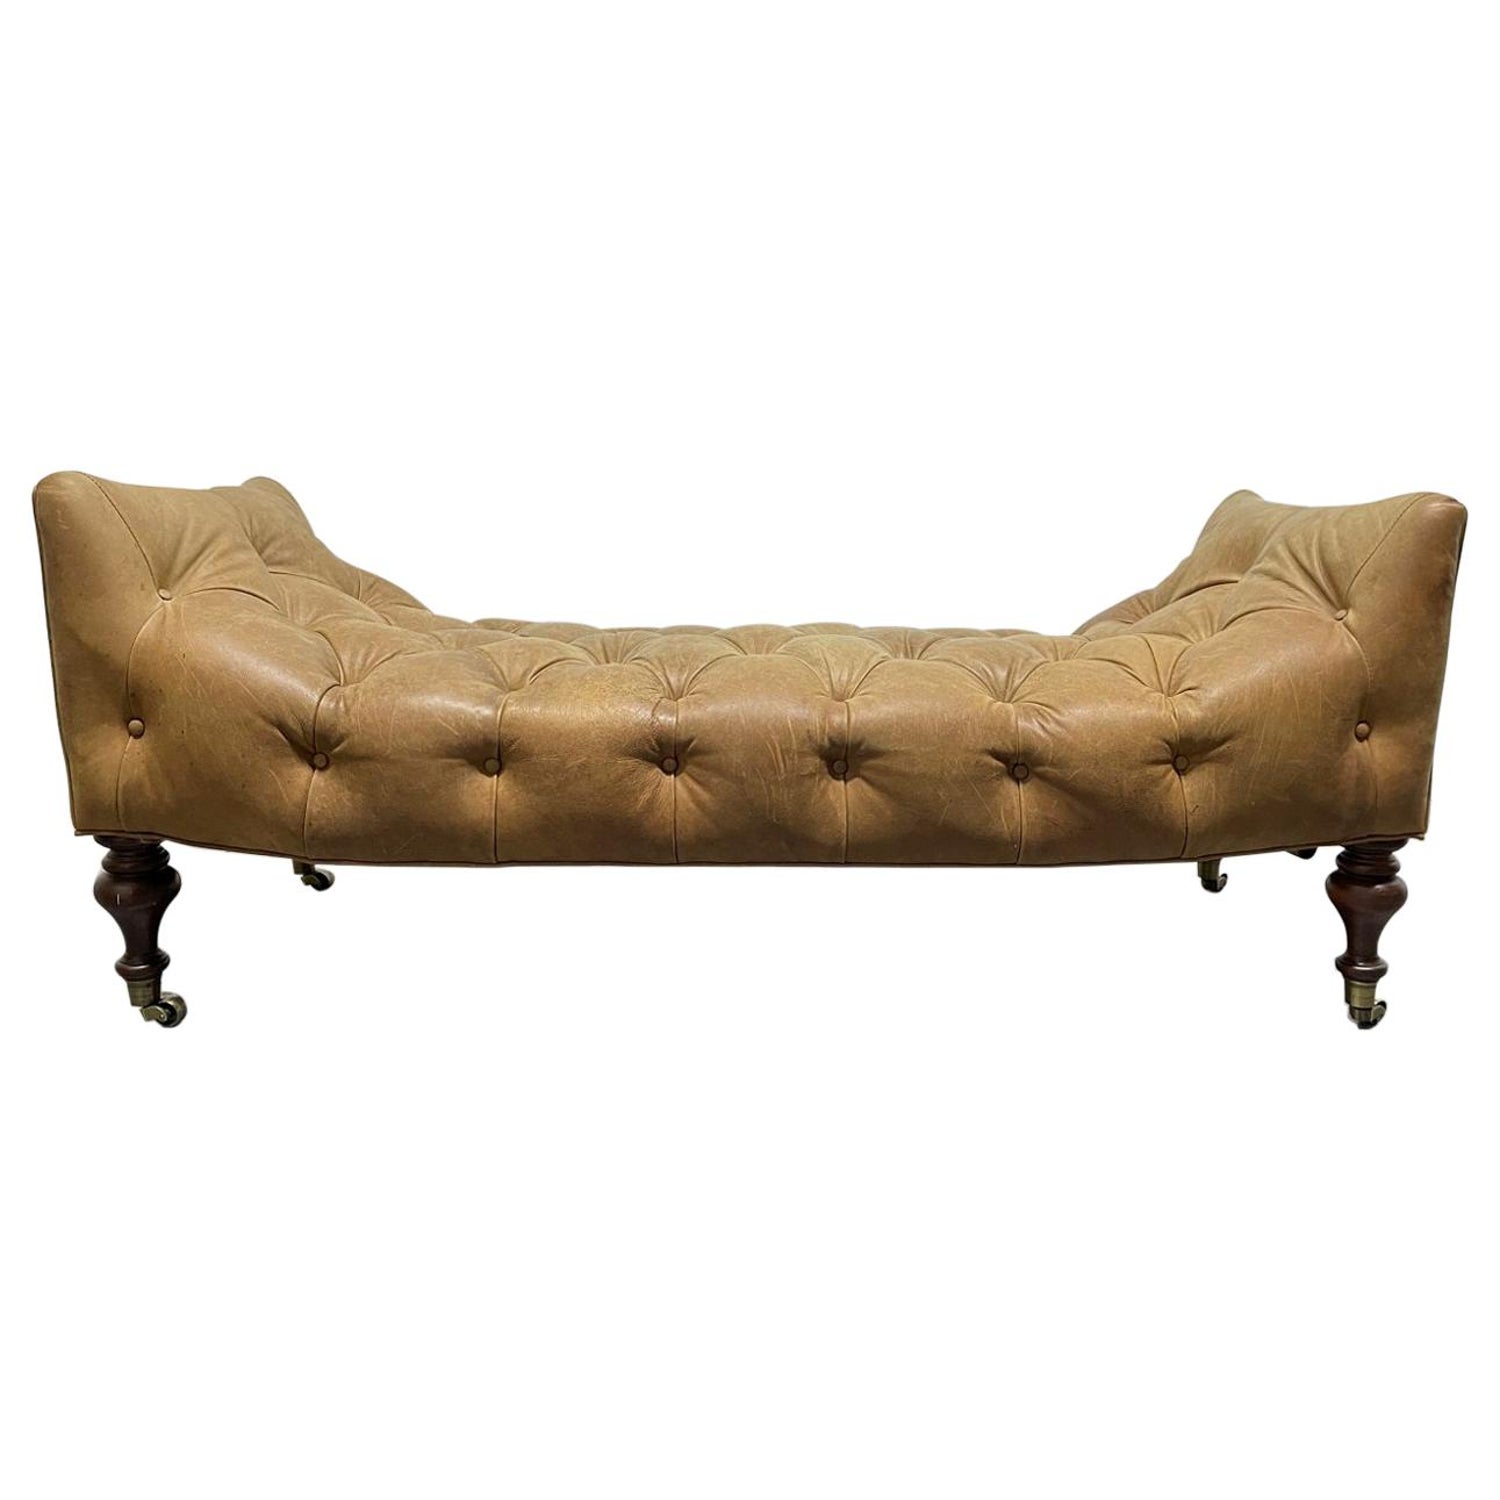 English Leather Tufted Bench At 1stdibs, Leather Tufted Bench